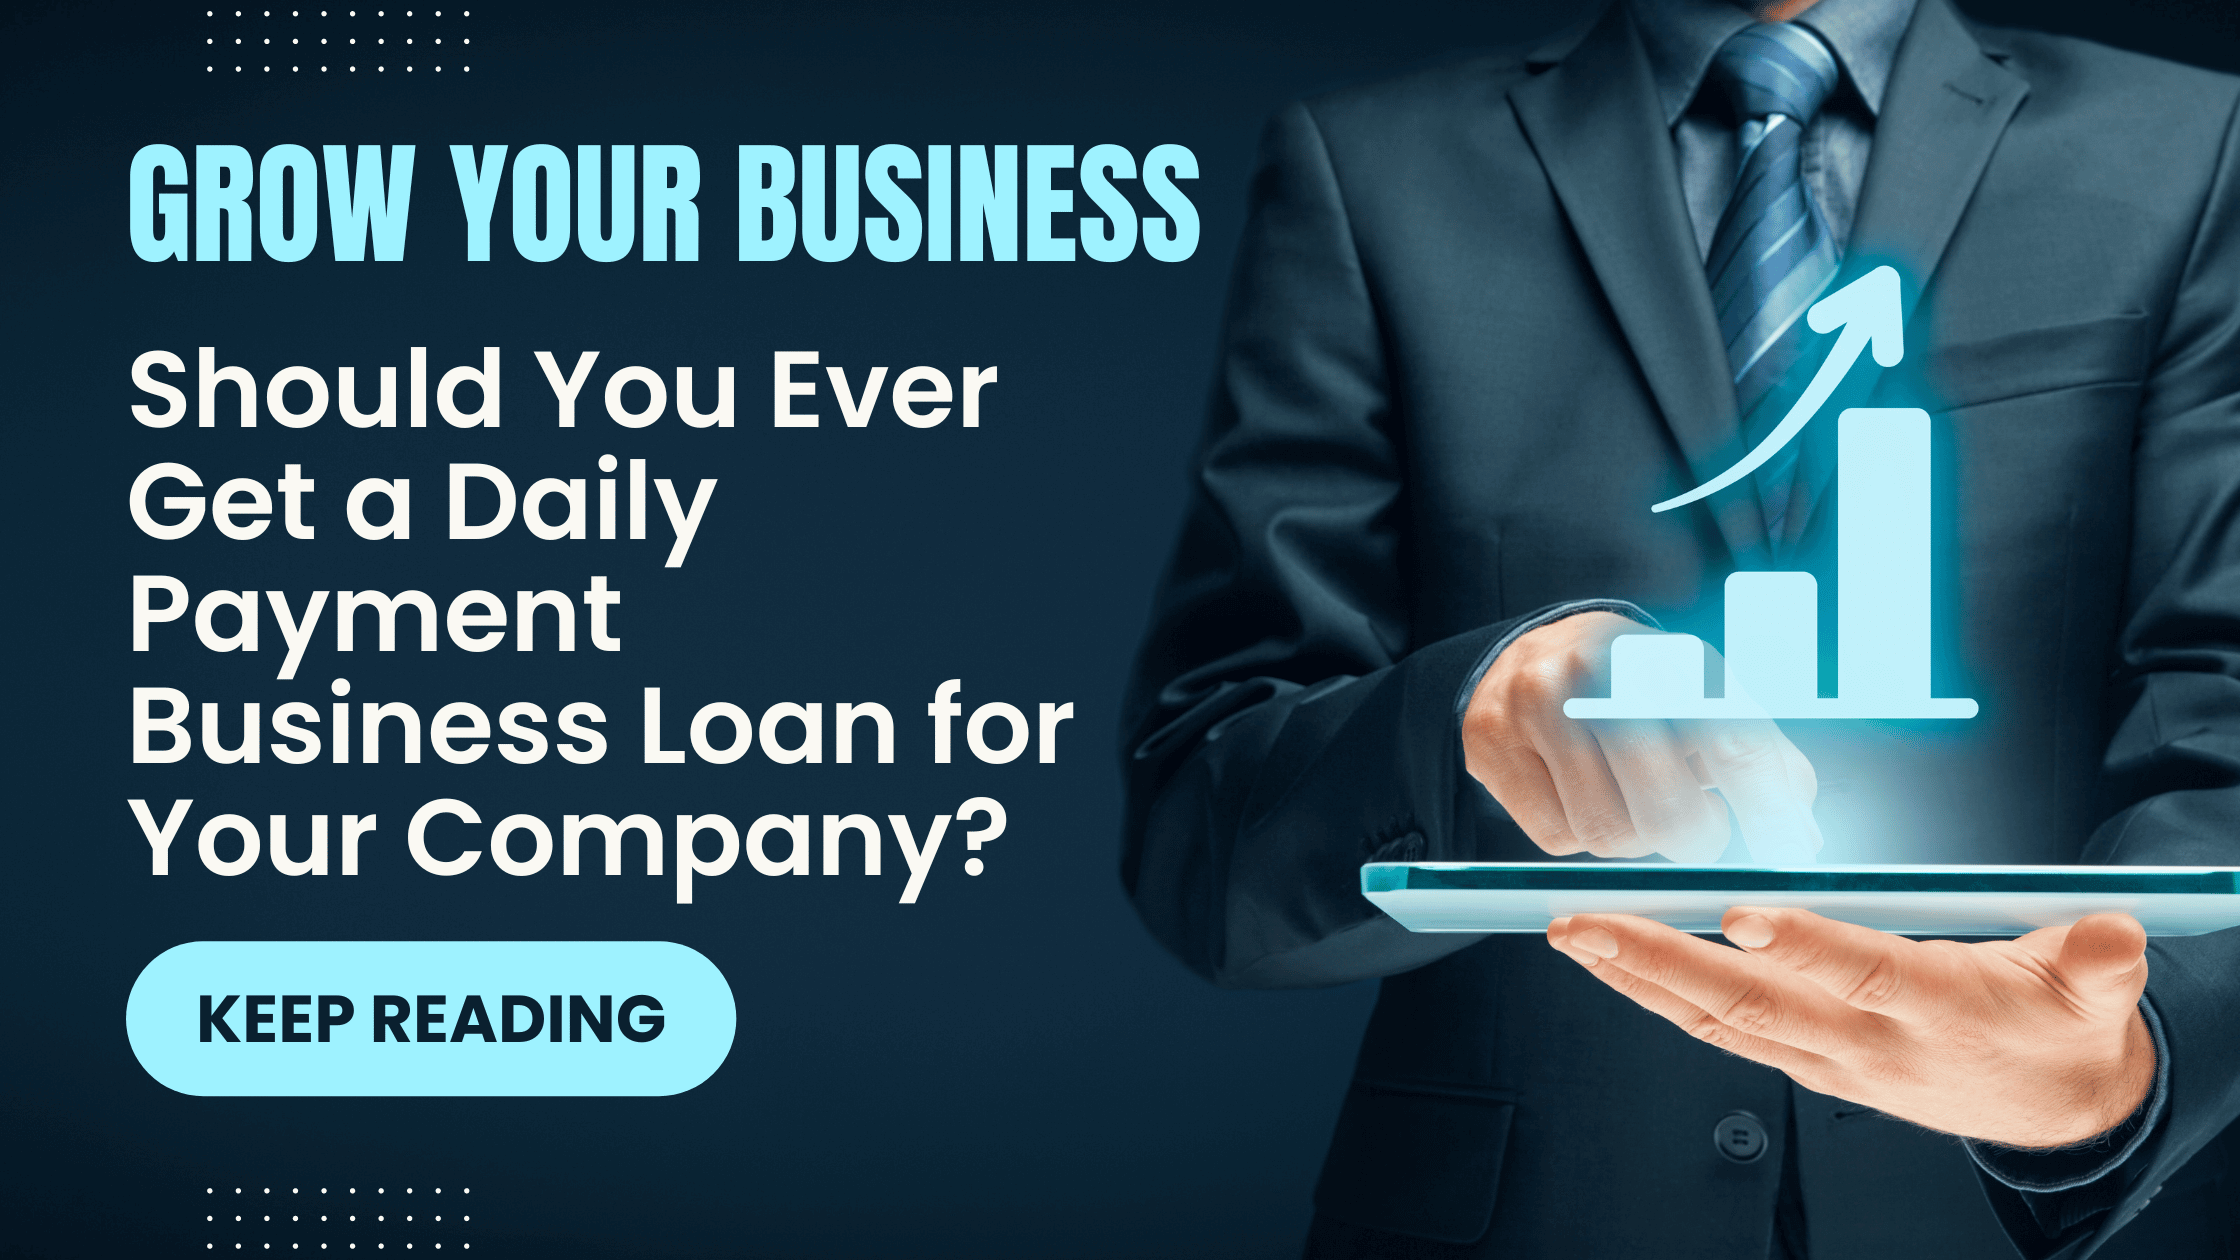 Should You Ever Get a Daily Payment Business Loan for Your Company